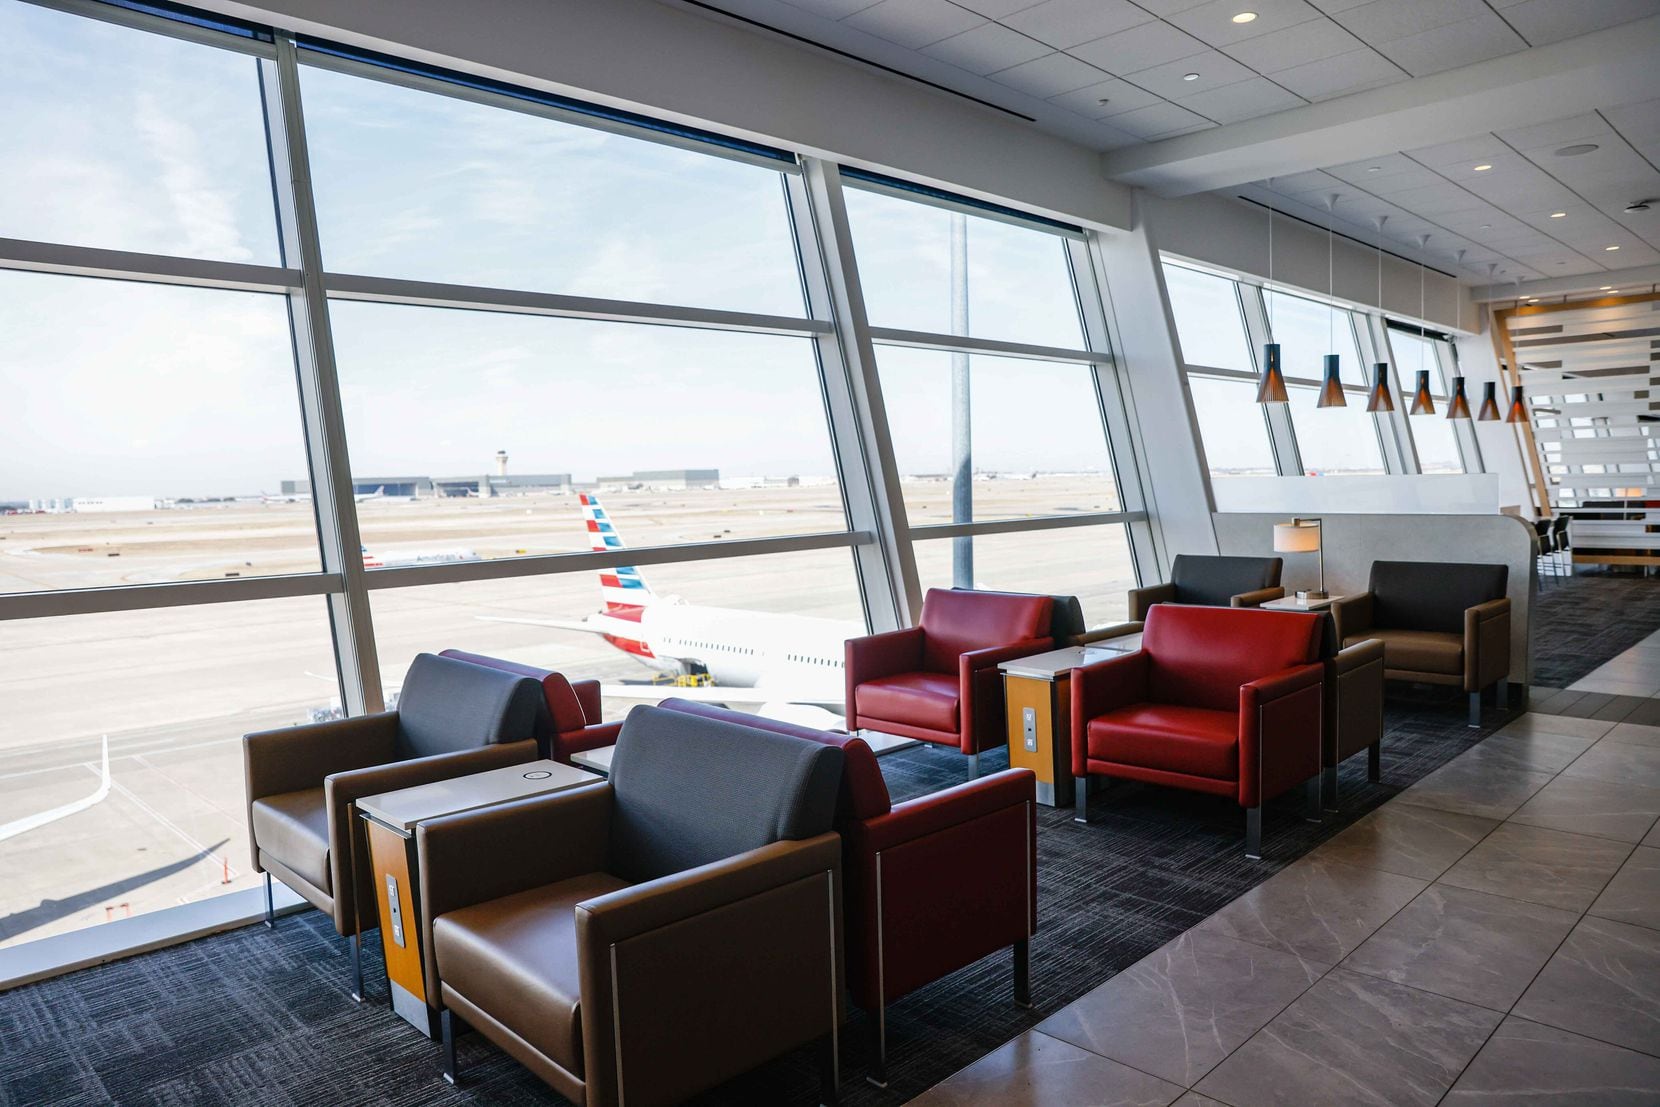 American Airlines' Flagship Lounge in Terminal D at DFW Airport shown on March 1, the day it...